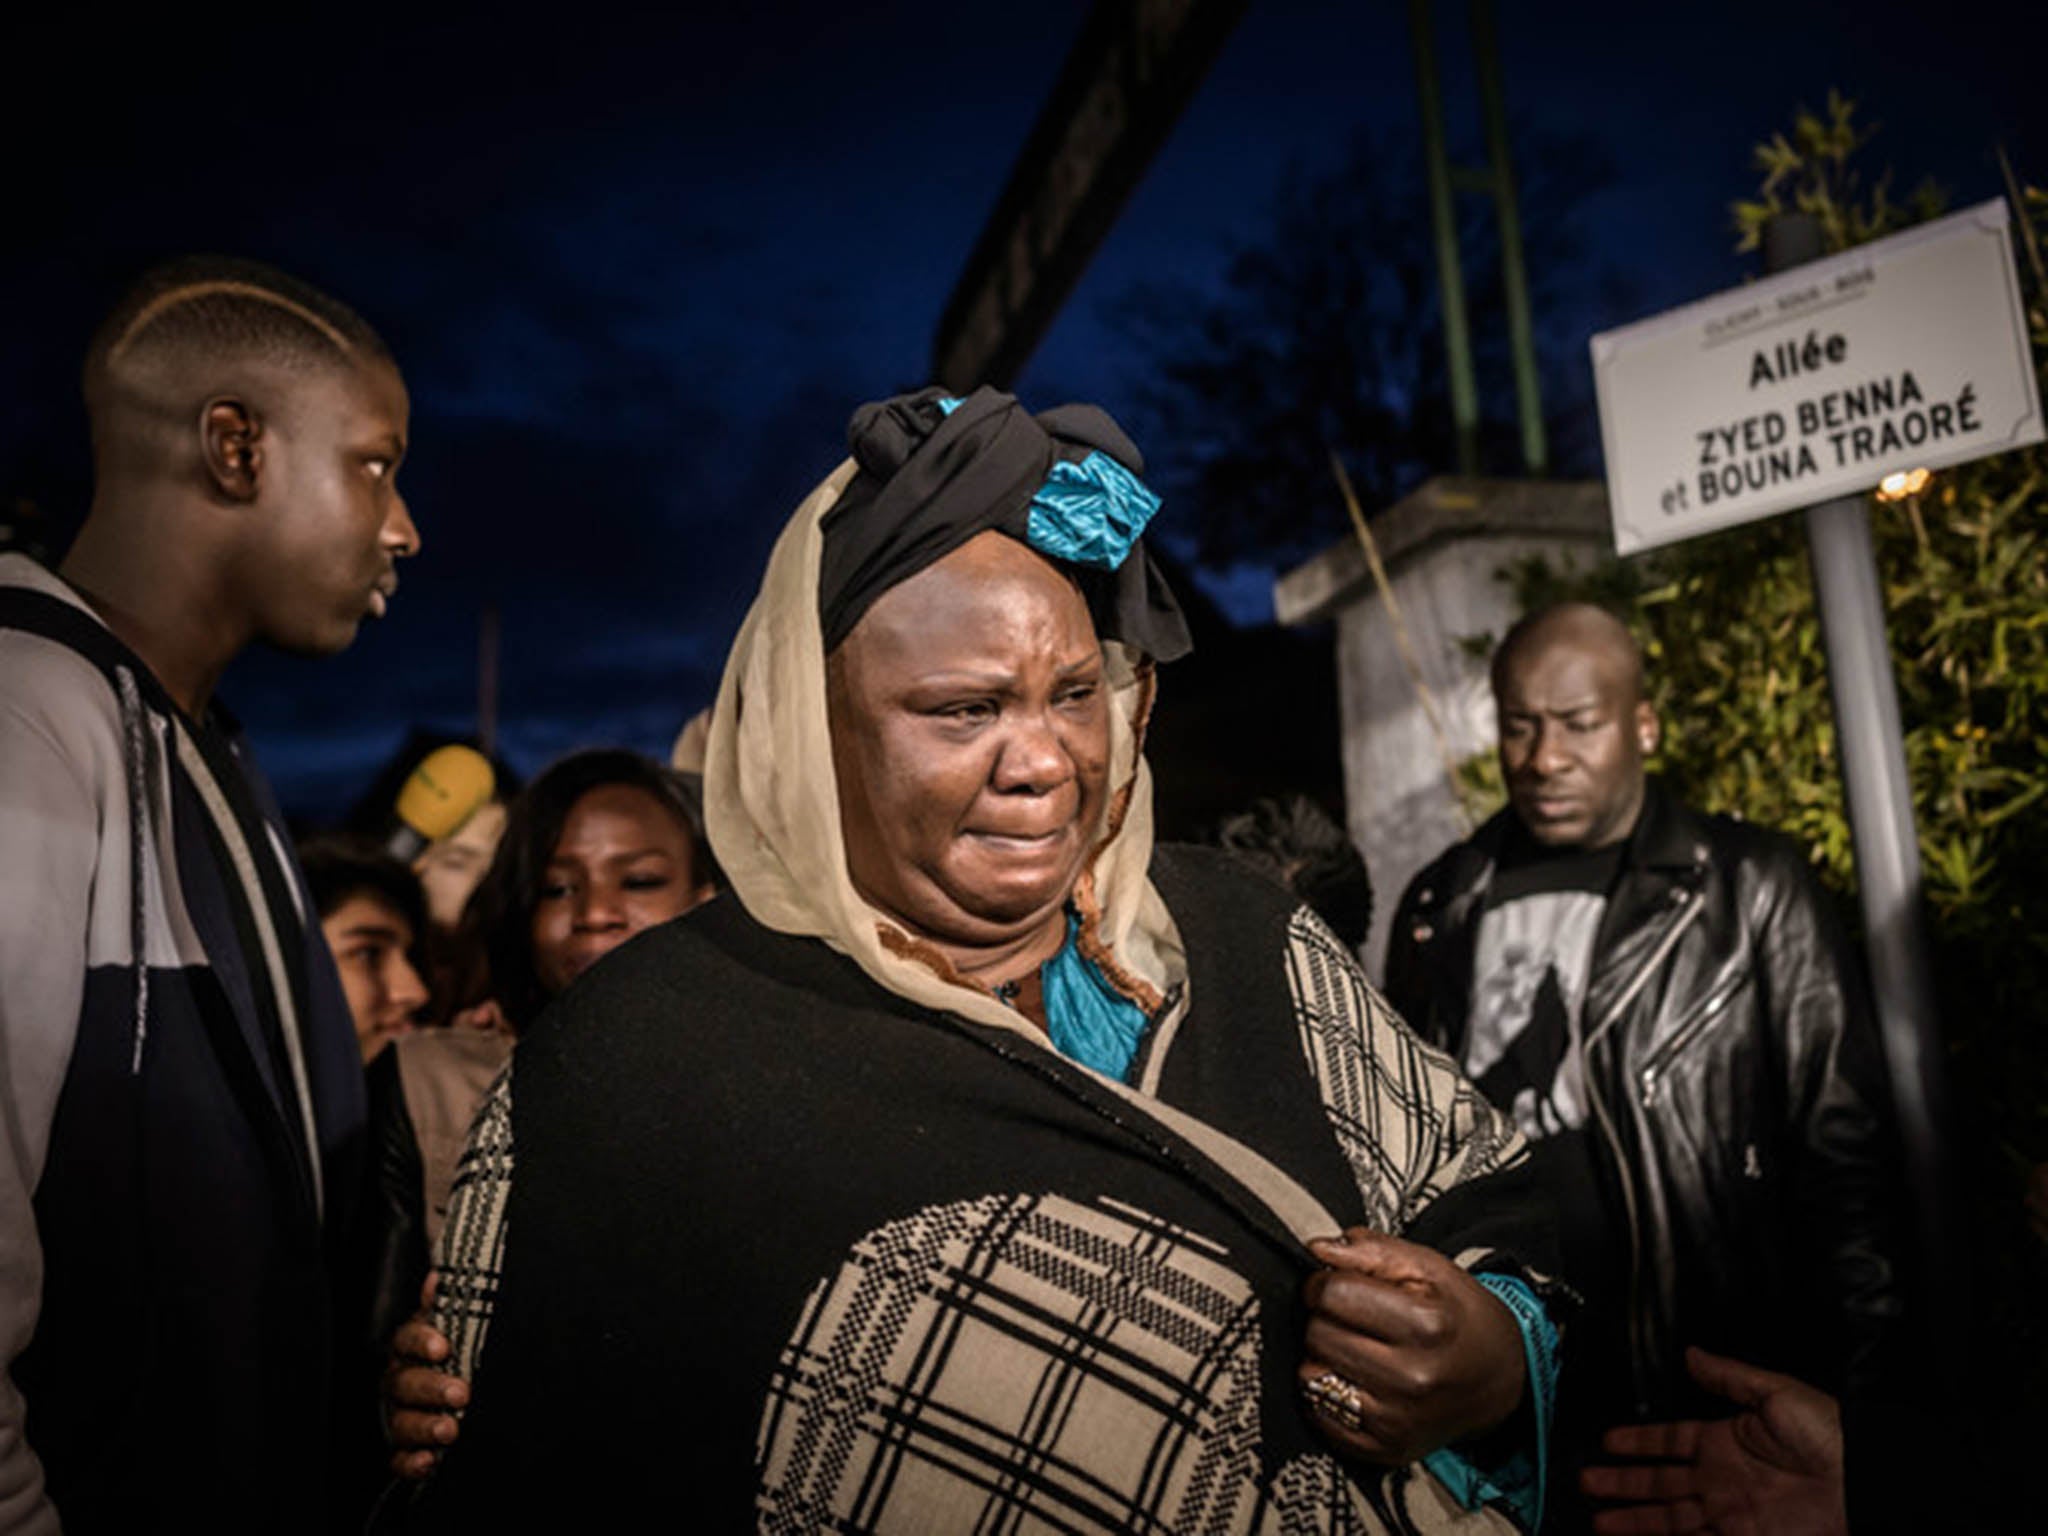 Relatives of Bouna Traore who died in an incident which sparked the 2005 Paris riots, inaugurate a street sign ten years later